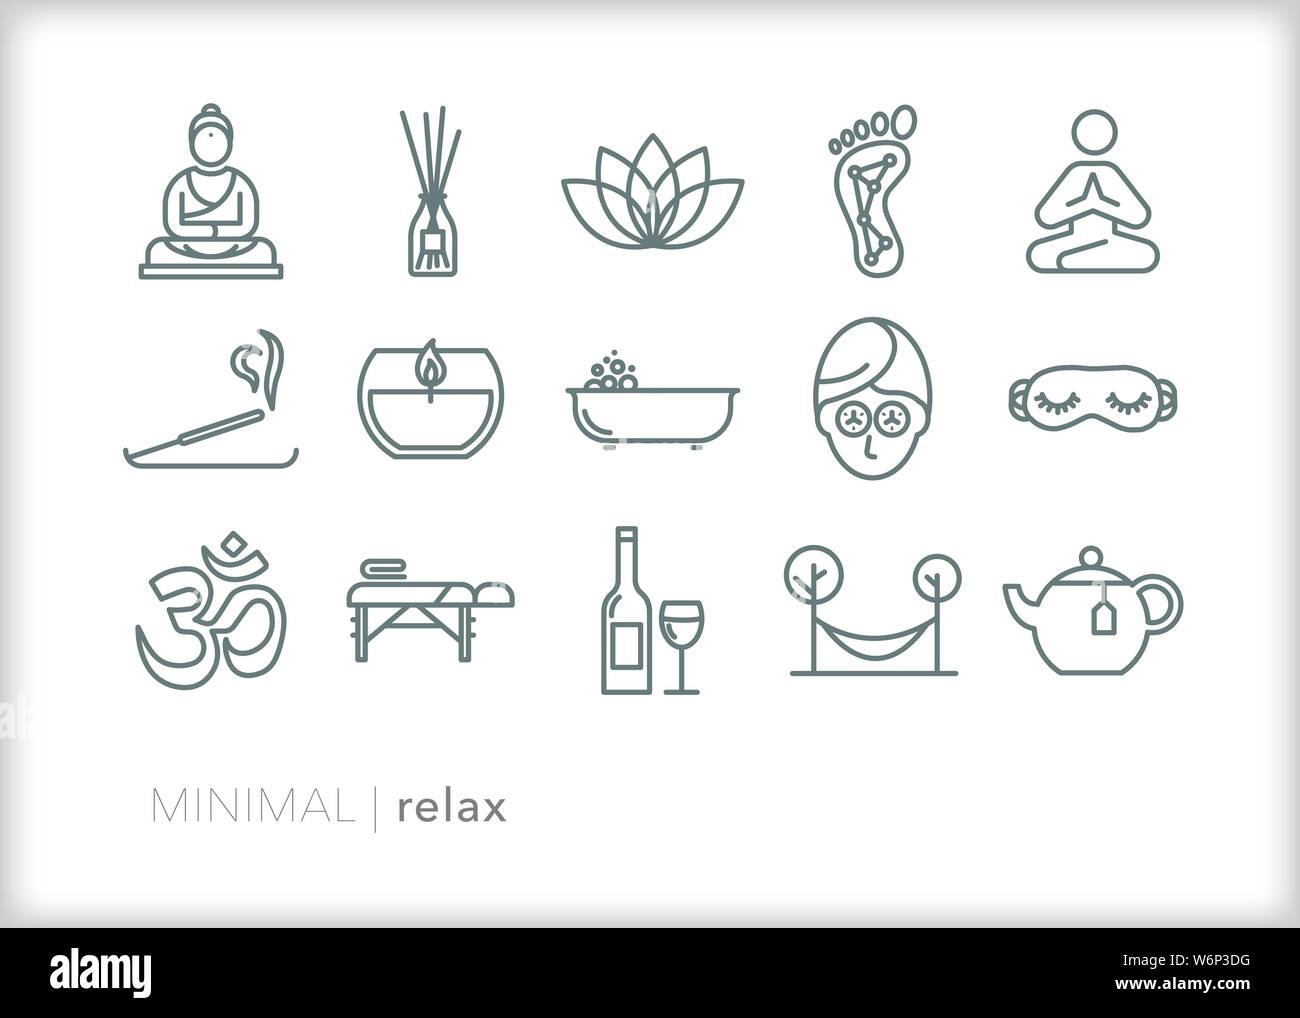 Set of 15 relaxation line icons for pampering and self care Stock Vector